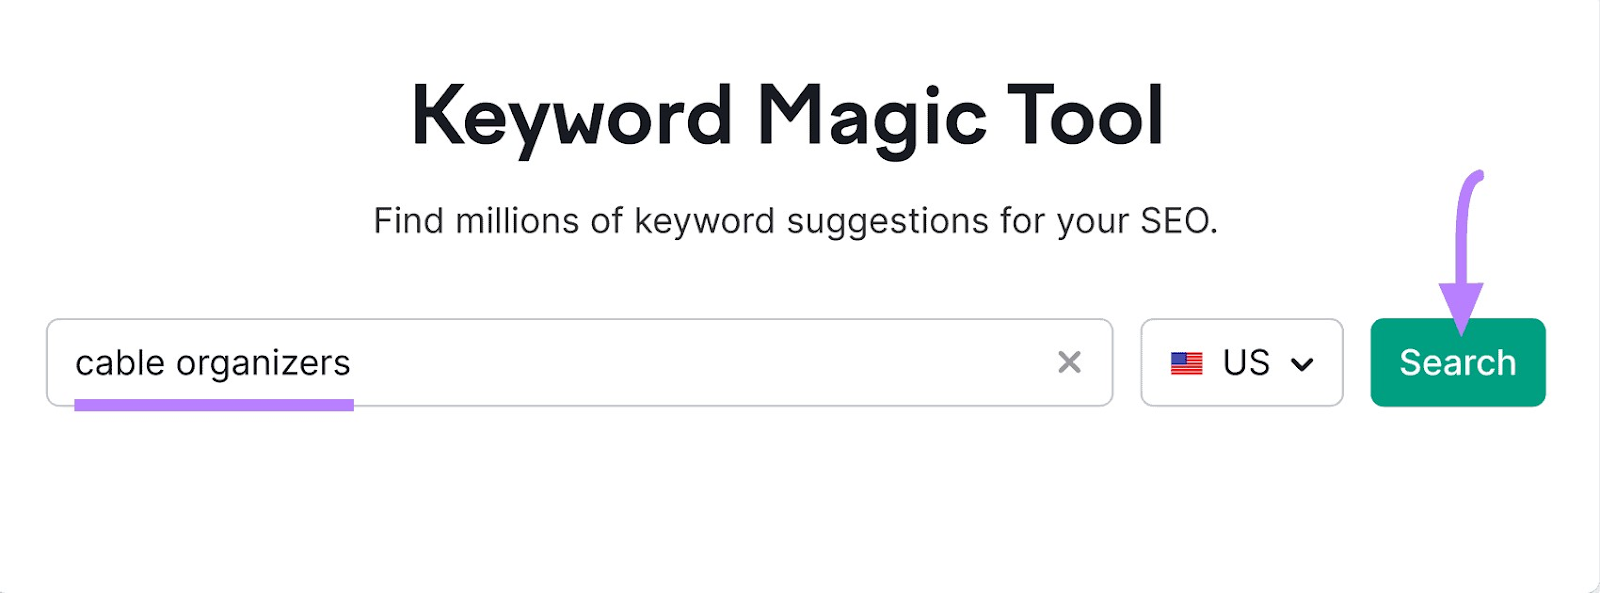 &Quot;Cable Organizers&Quot; Entered Into The Keyword Magic Tool Search Bar